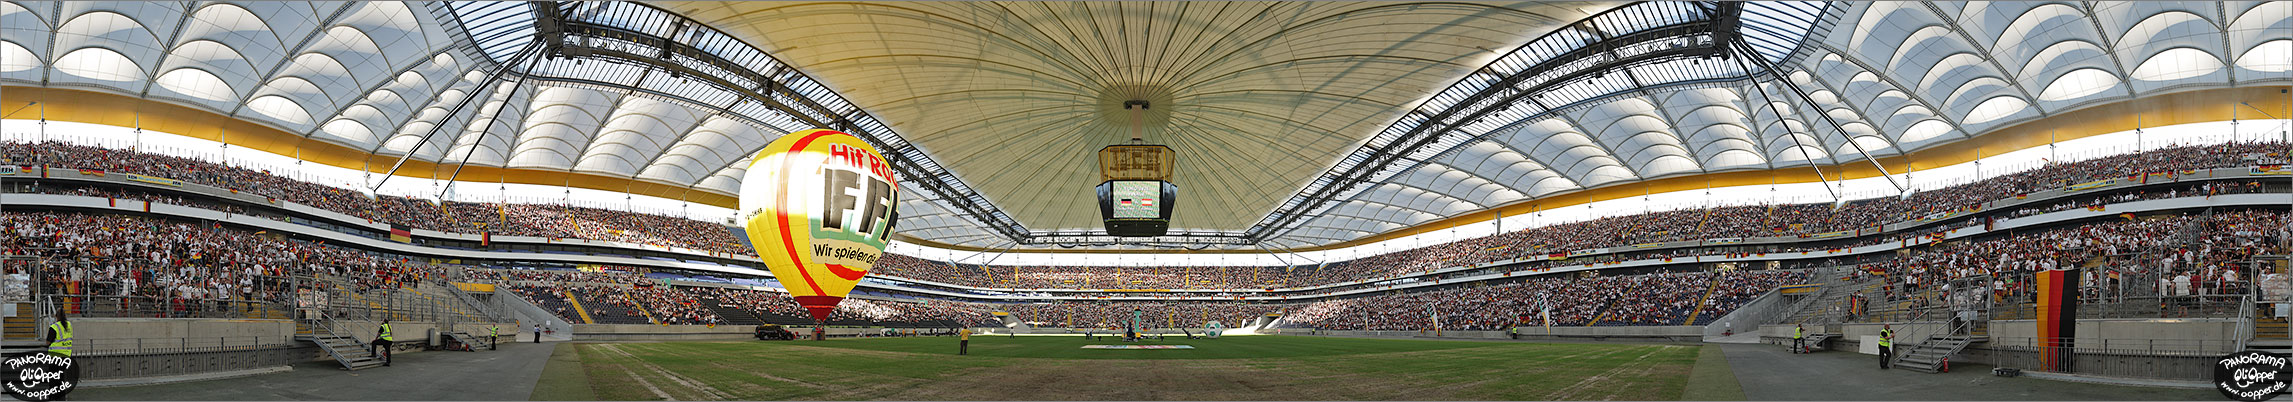 Panorama Frankfurt - Commerzbank Arena - p286 - (c) by Oliver Opper